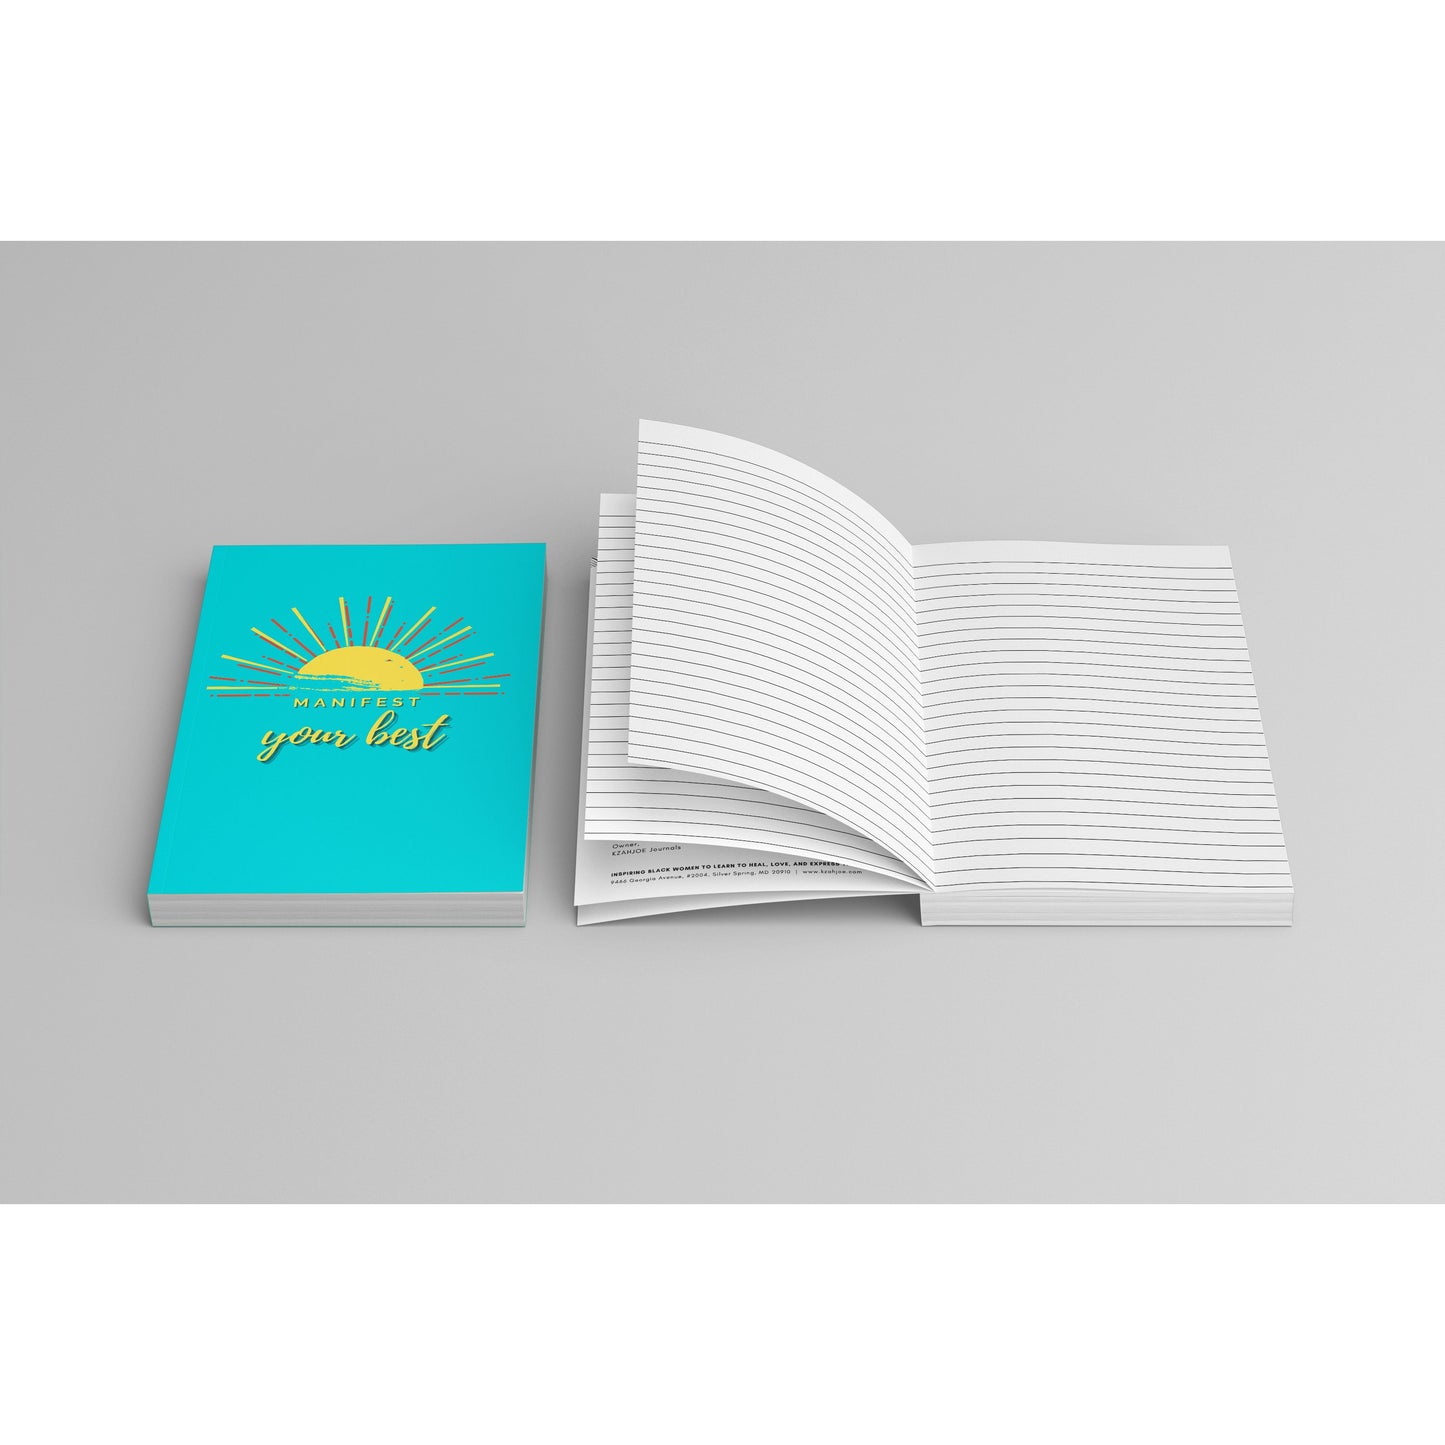 "Sunrise" Manifest Your Best Journal | 200 Pages, 6"x9" Lined/Dot Grid